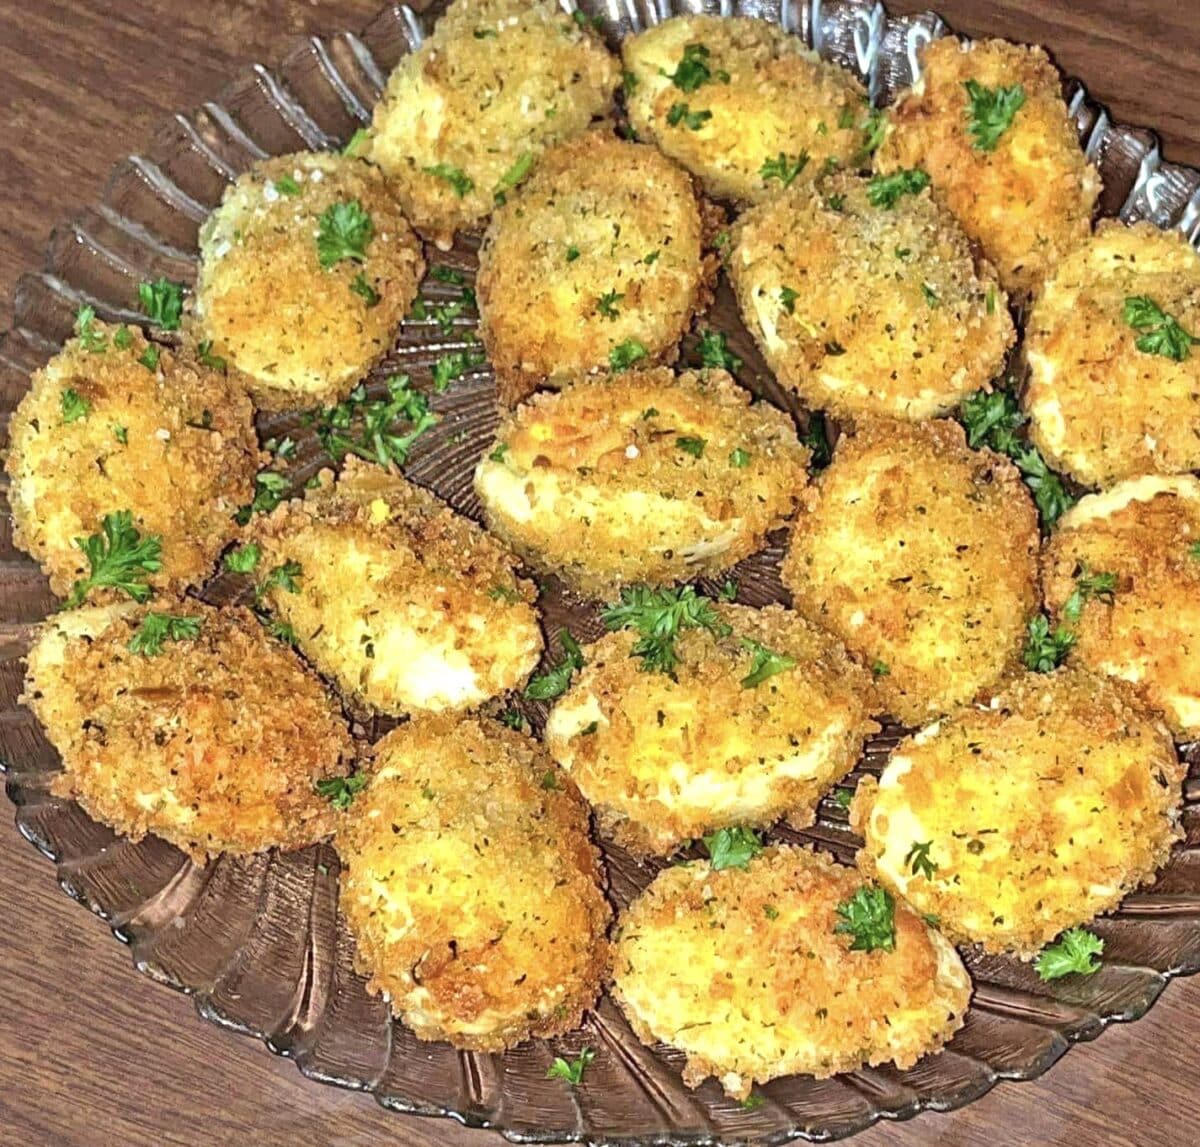 Fried Deviled Eggs by Brittany Moore